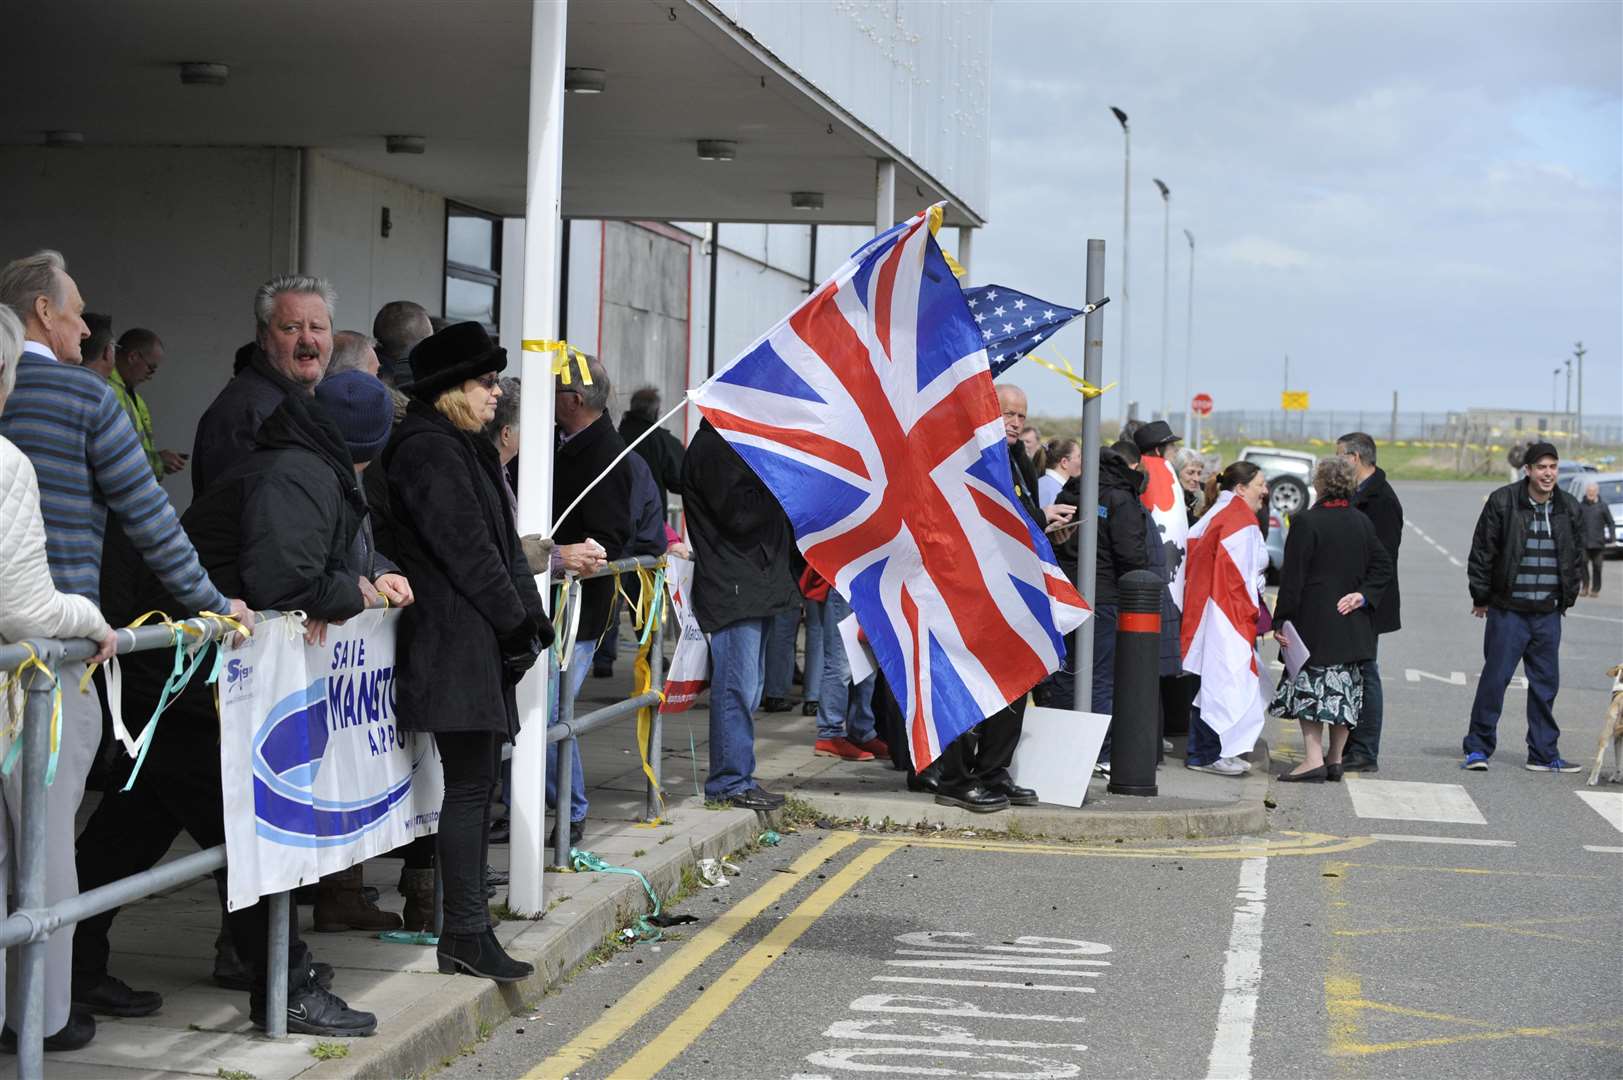 Protests have long called for the airport to be revived